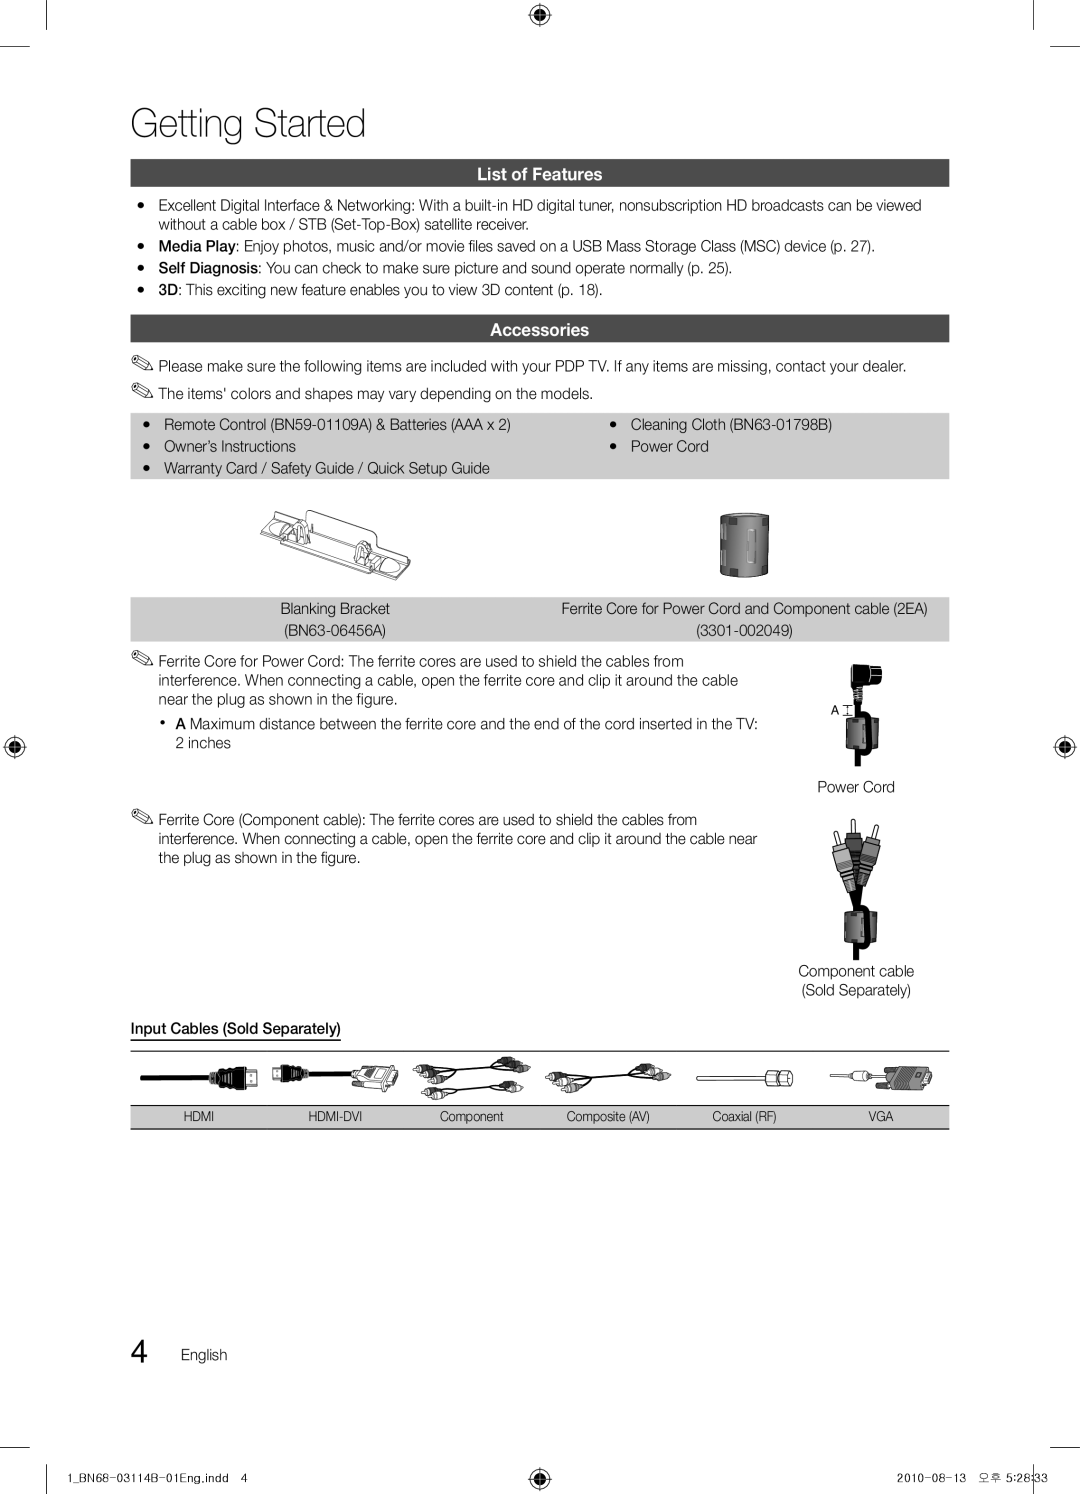 Samsung PN50C490, BN68-03114B-01, Series P4+ 490 user manual Getting Started, List of Features, Accessories 